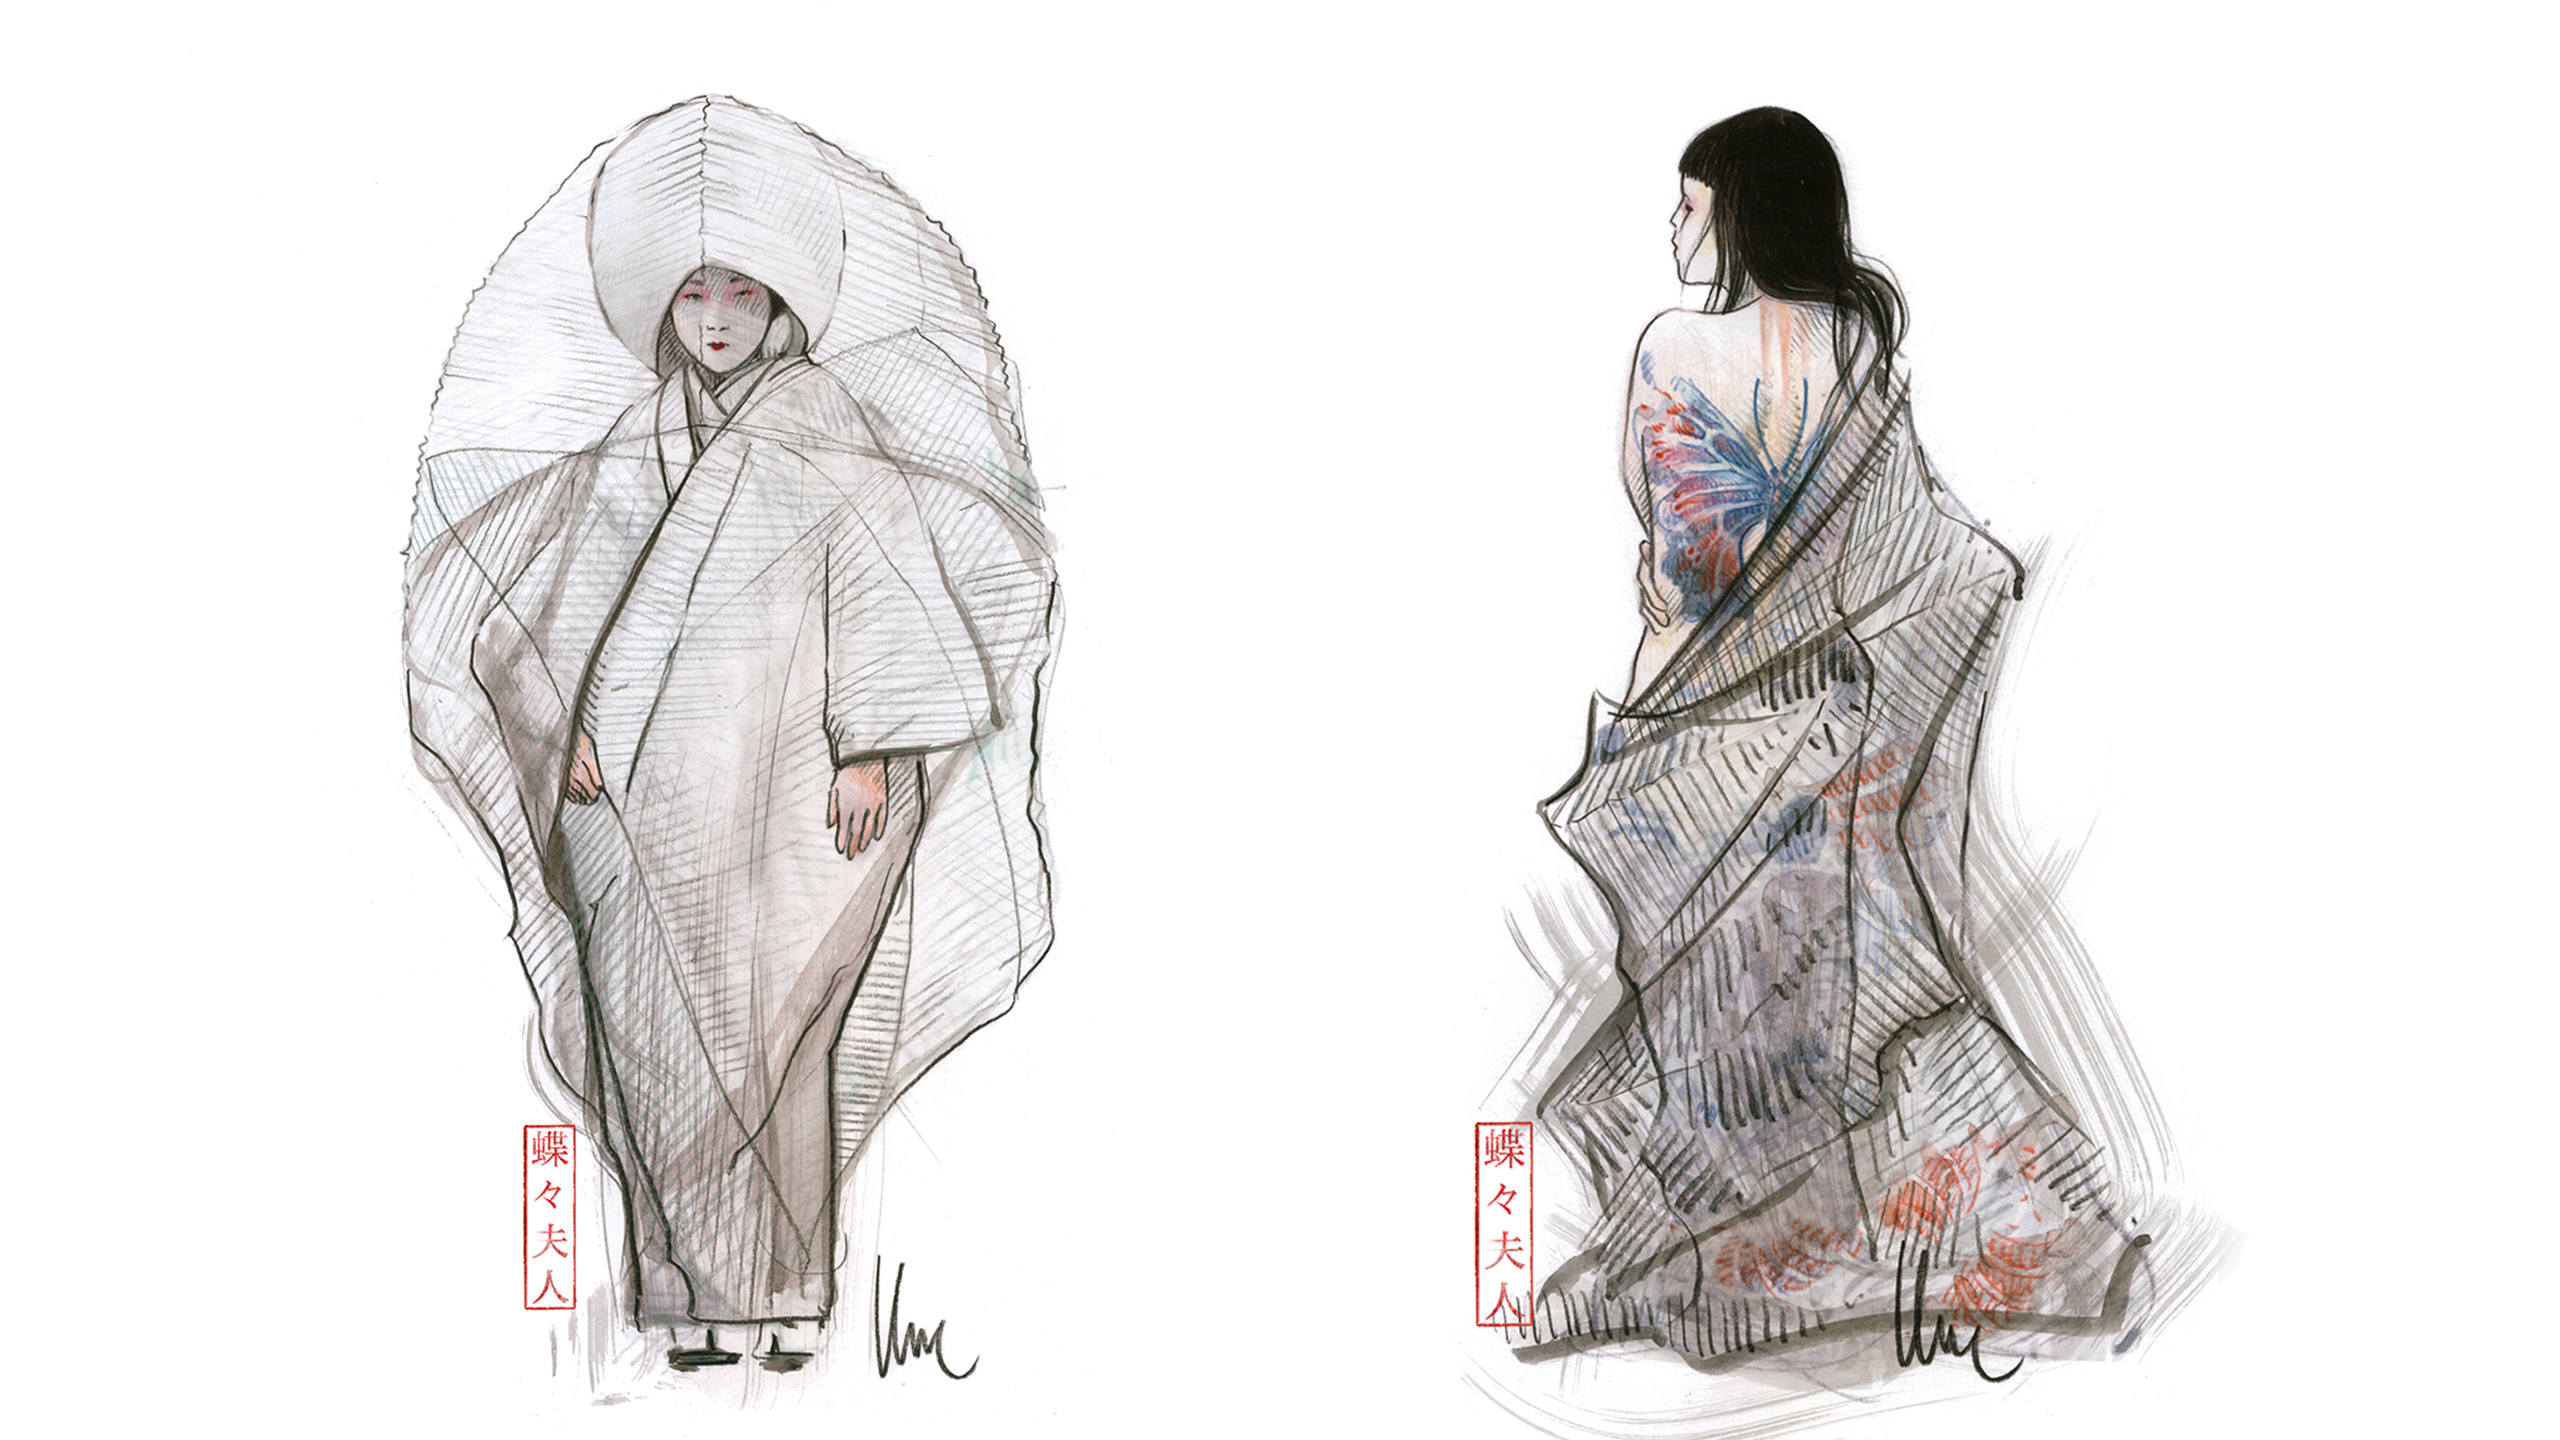 Three costume sketches for an opera production of Madama Butterfly